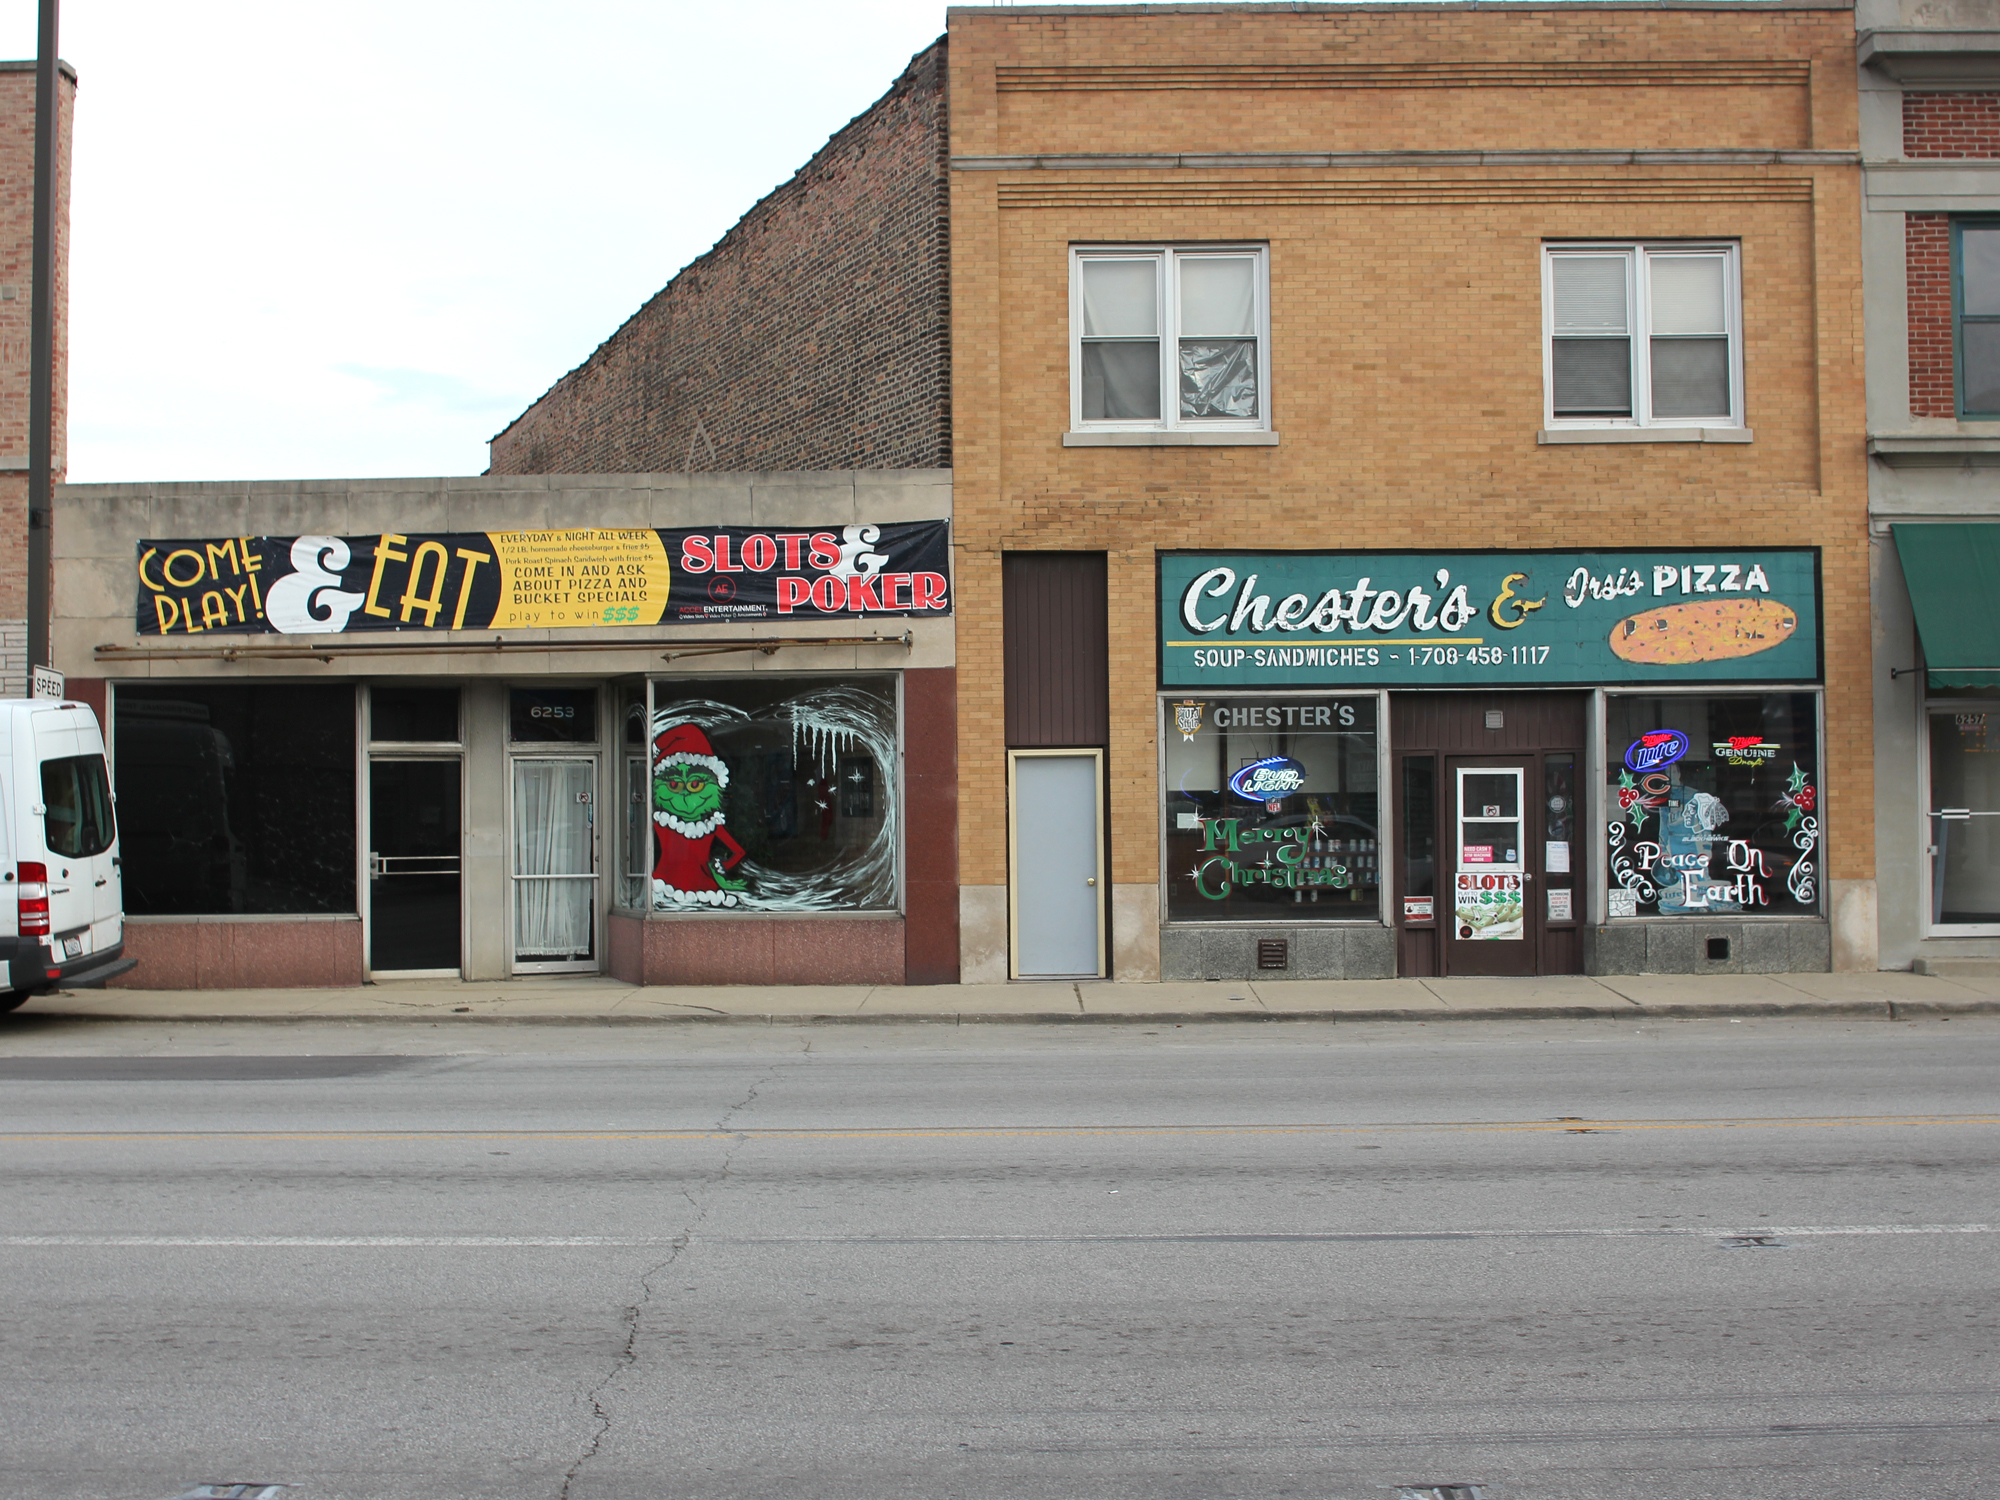 CHICAGO HISTORY IN A PIZZA: CHESTER’S & ORSI’S IN SUMMIT